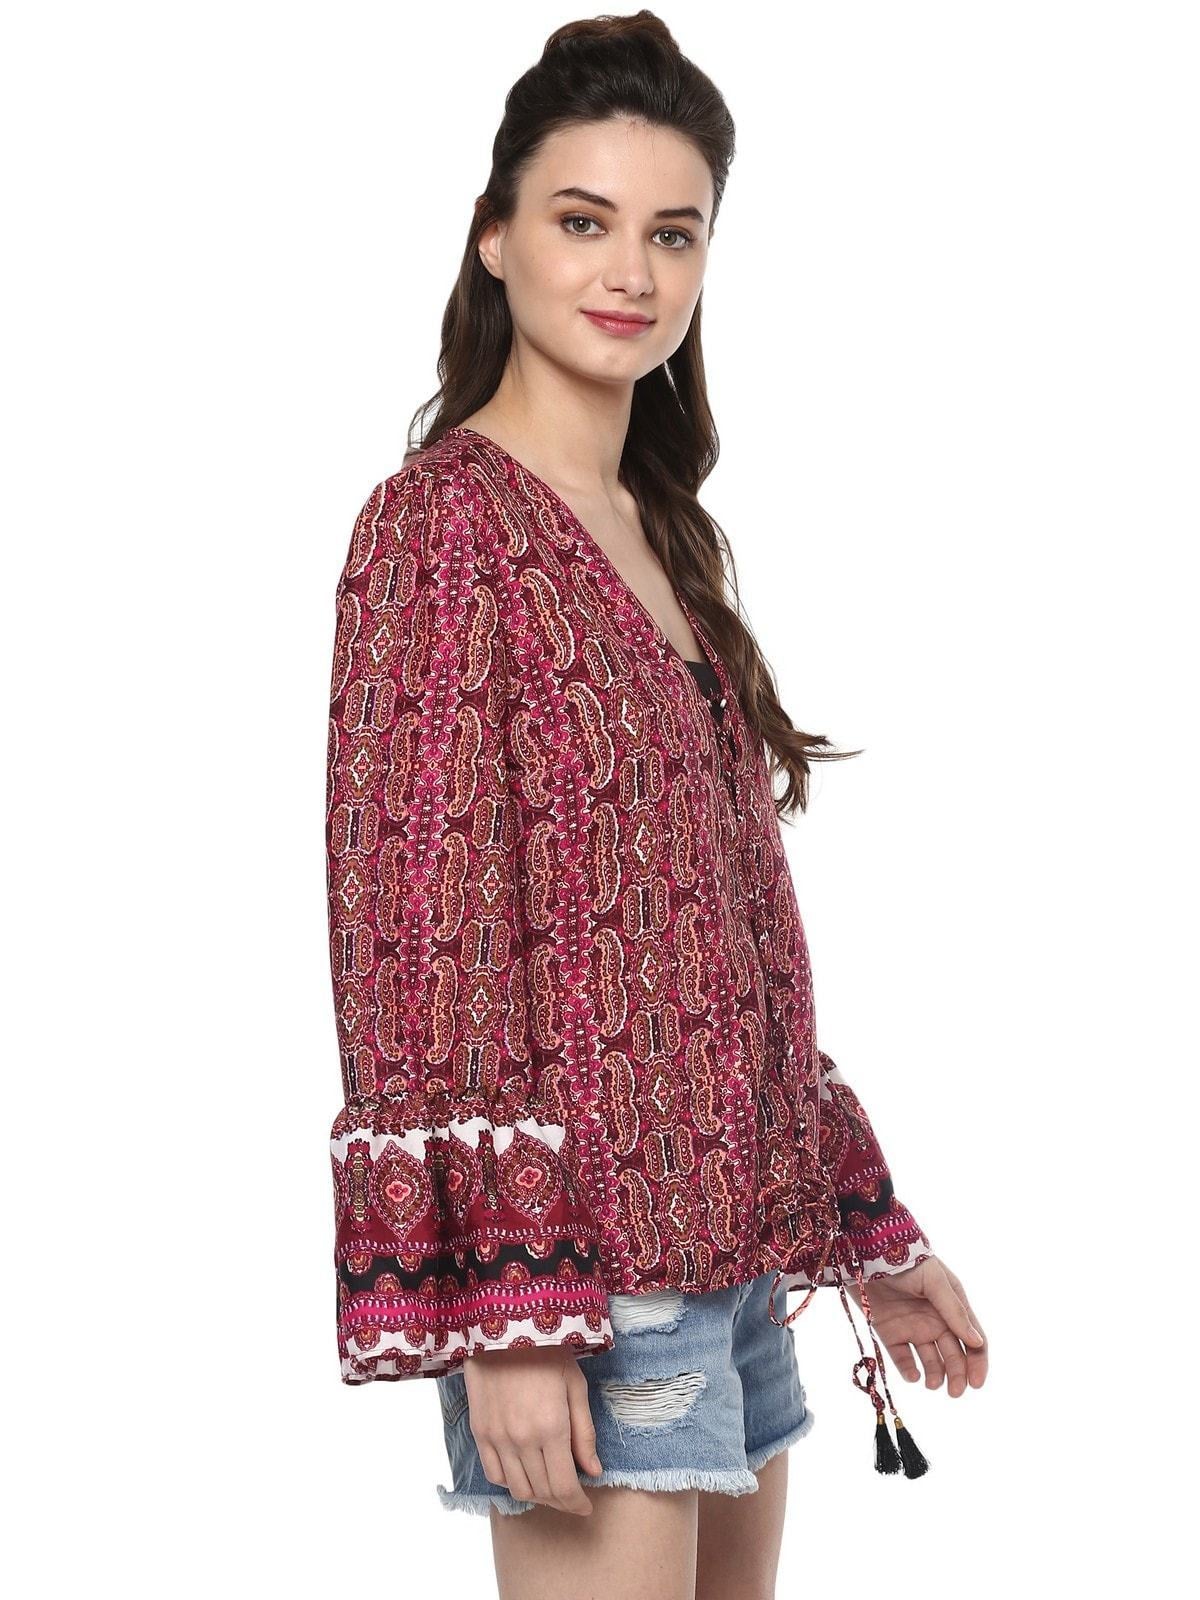 Women's Printed Front Tie-Up Top - Pannkh